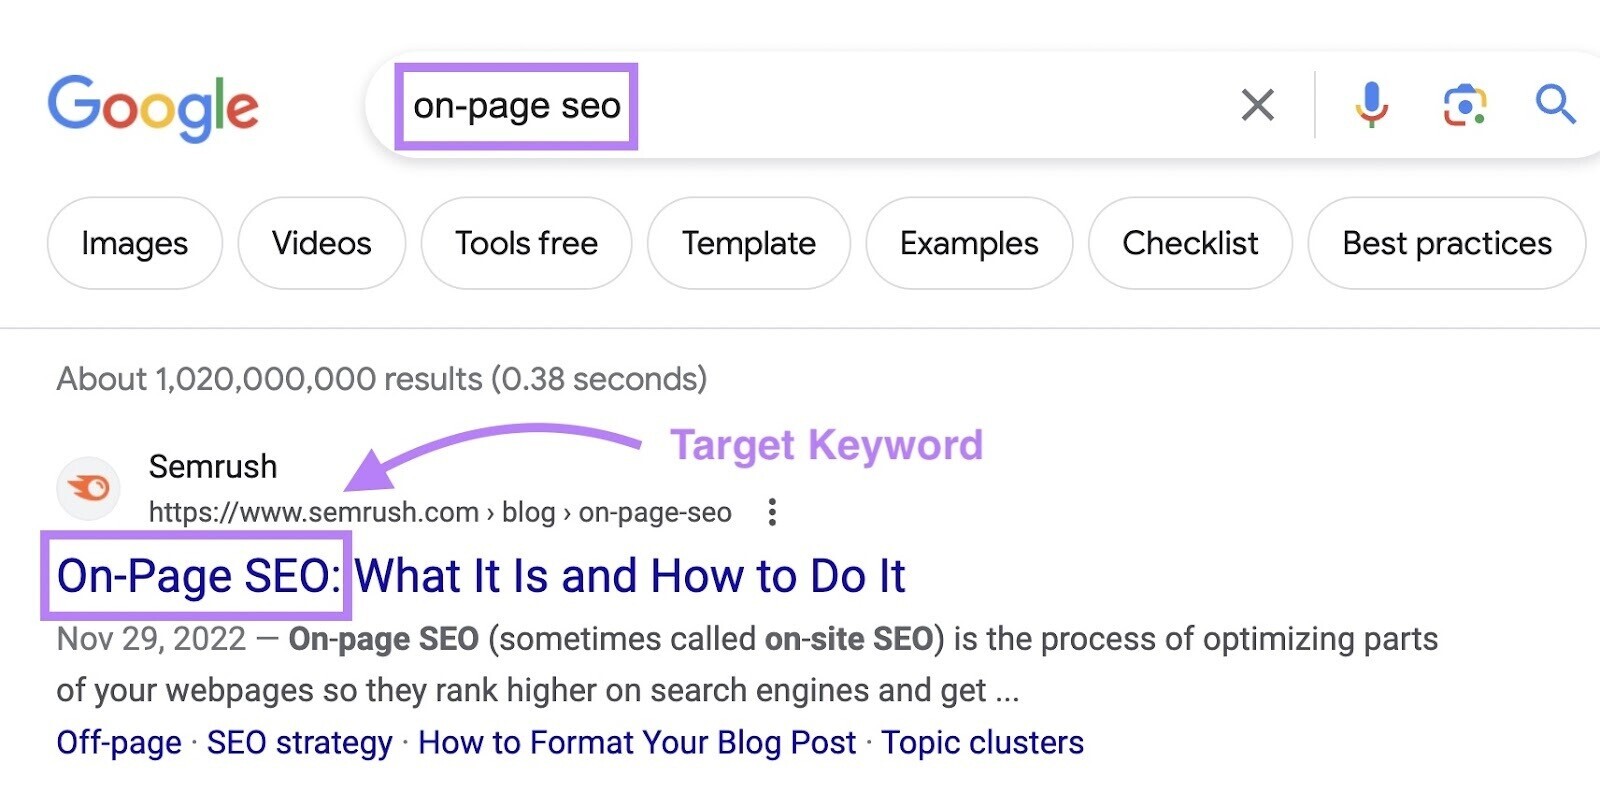 Google search results for "on-page seo" show Semrush´s article titled "On-Page SEO: What It Is and How to Do It"